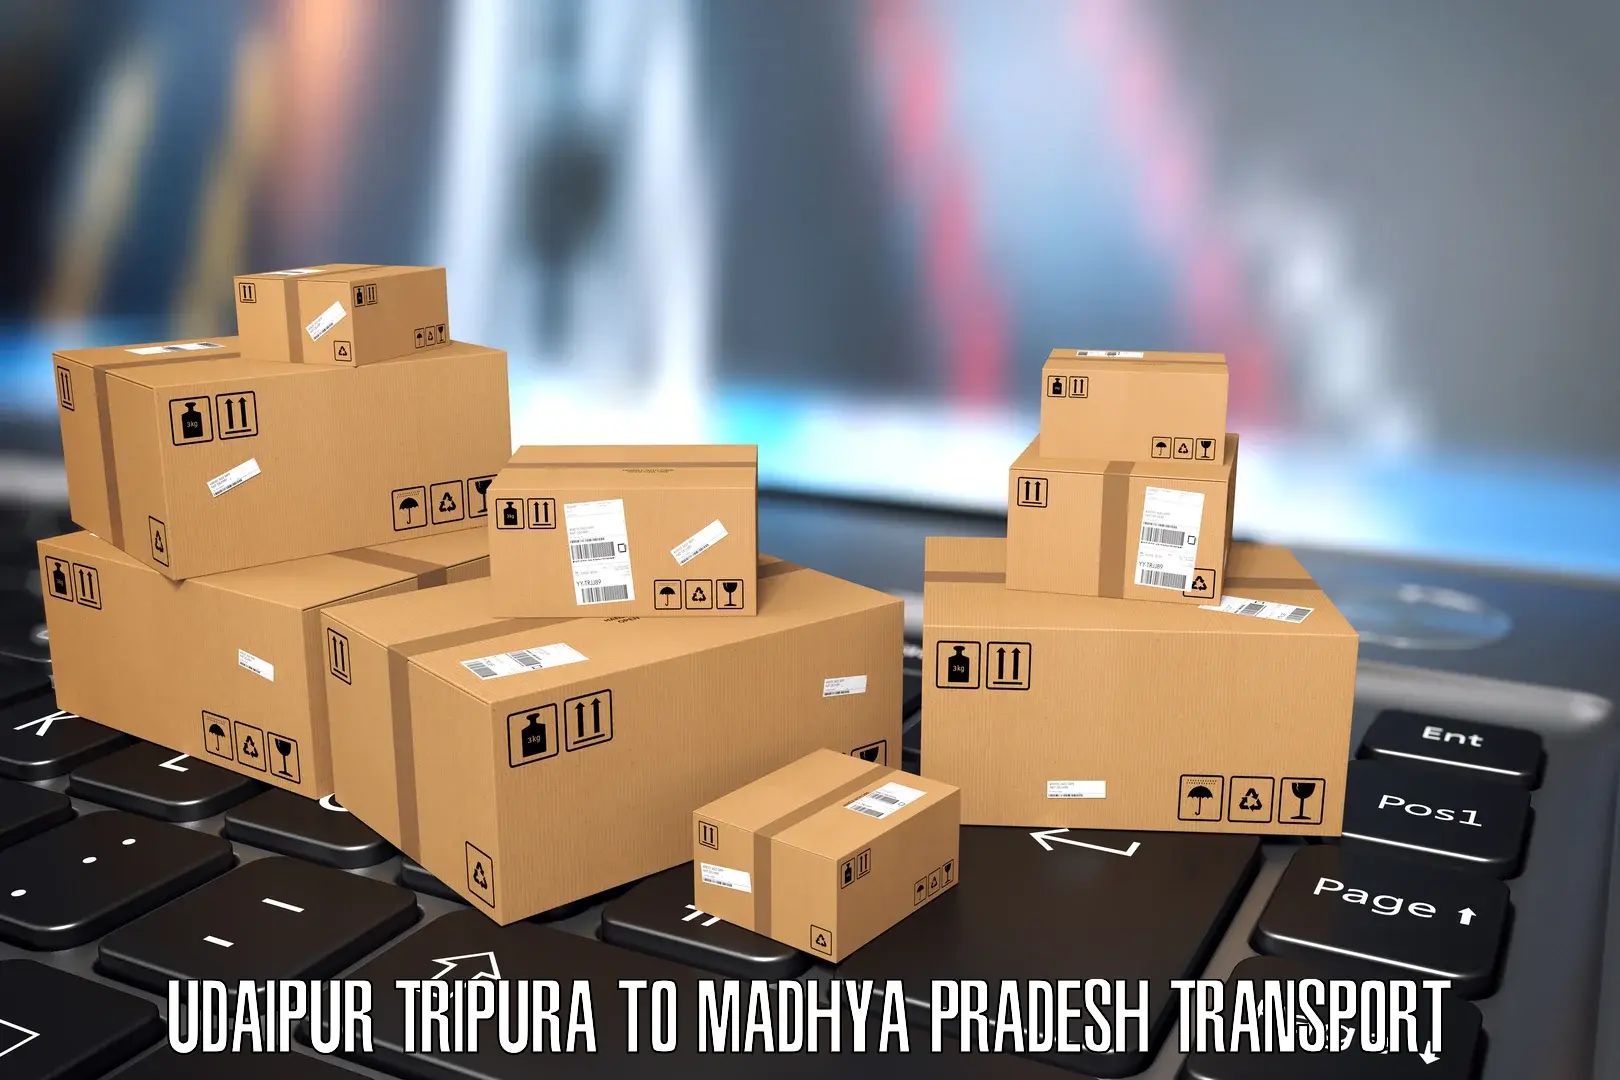 Goods delivery service Udaipur Tripura to Rahatgarh